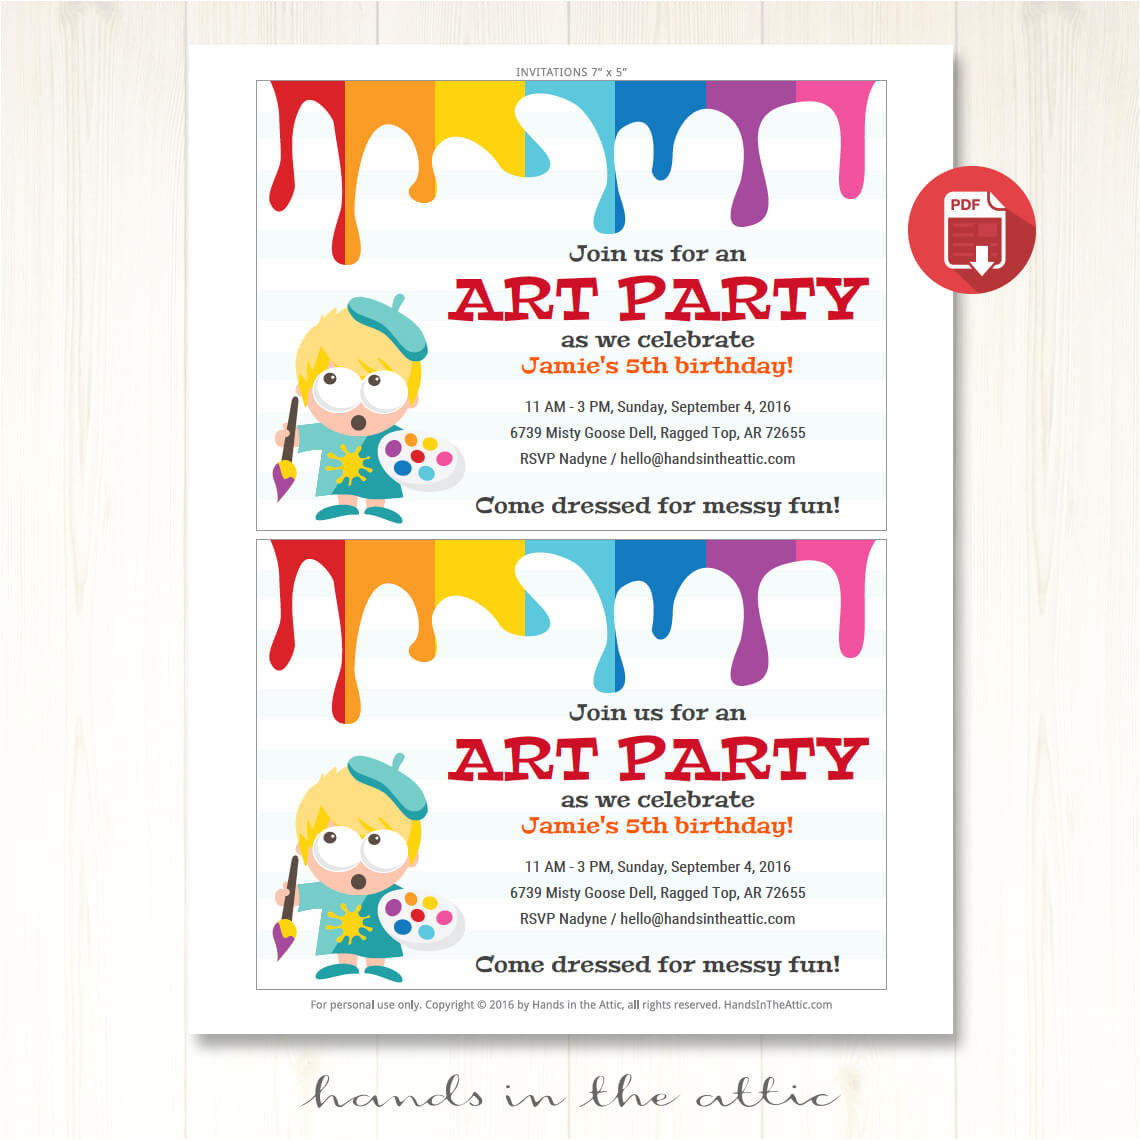 Art Party Invitation Template Art Party Invitation Printable Template Hands In the attic